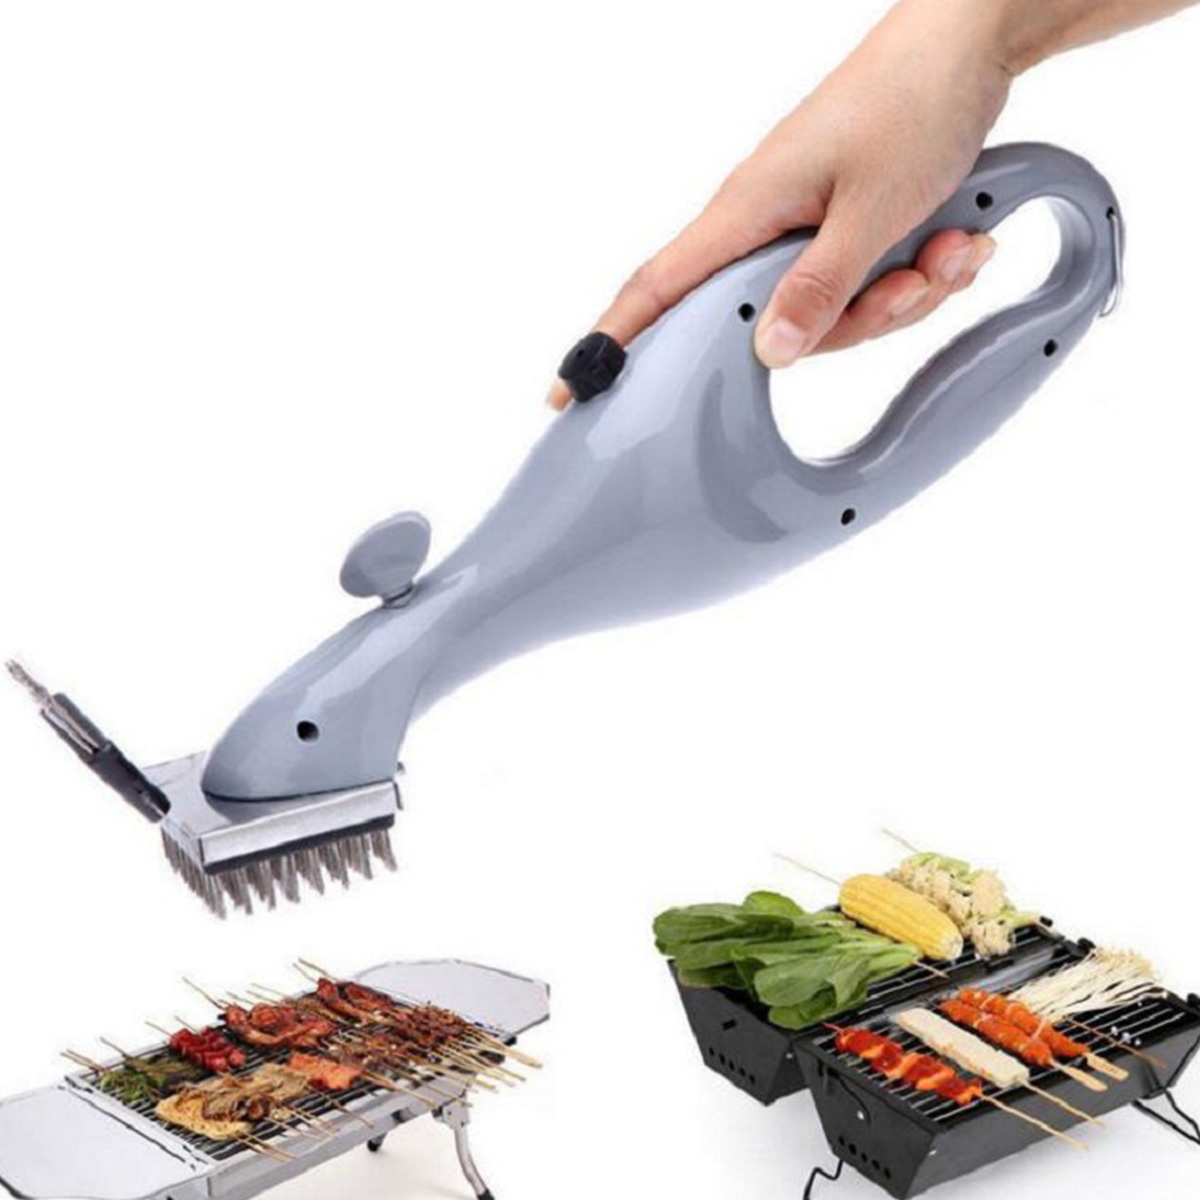 Stainless-Steel-BBQ-Grill-Cleaning-Tools-Outdoor-Barbecue-Picnics-Brush-Cleaner-1652170-3